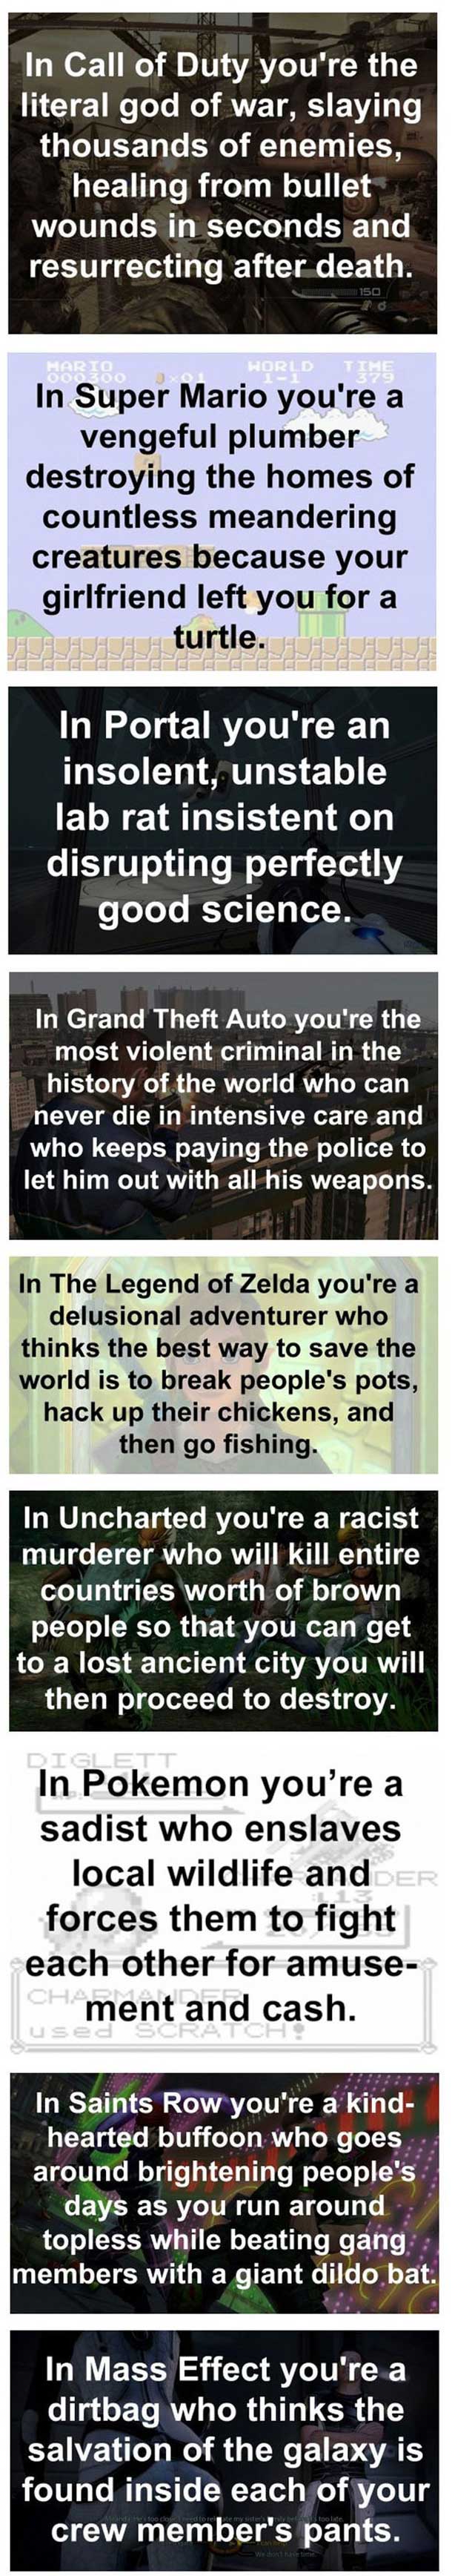 Video Games Summed Up By A Cynic